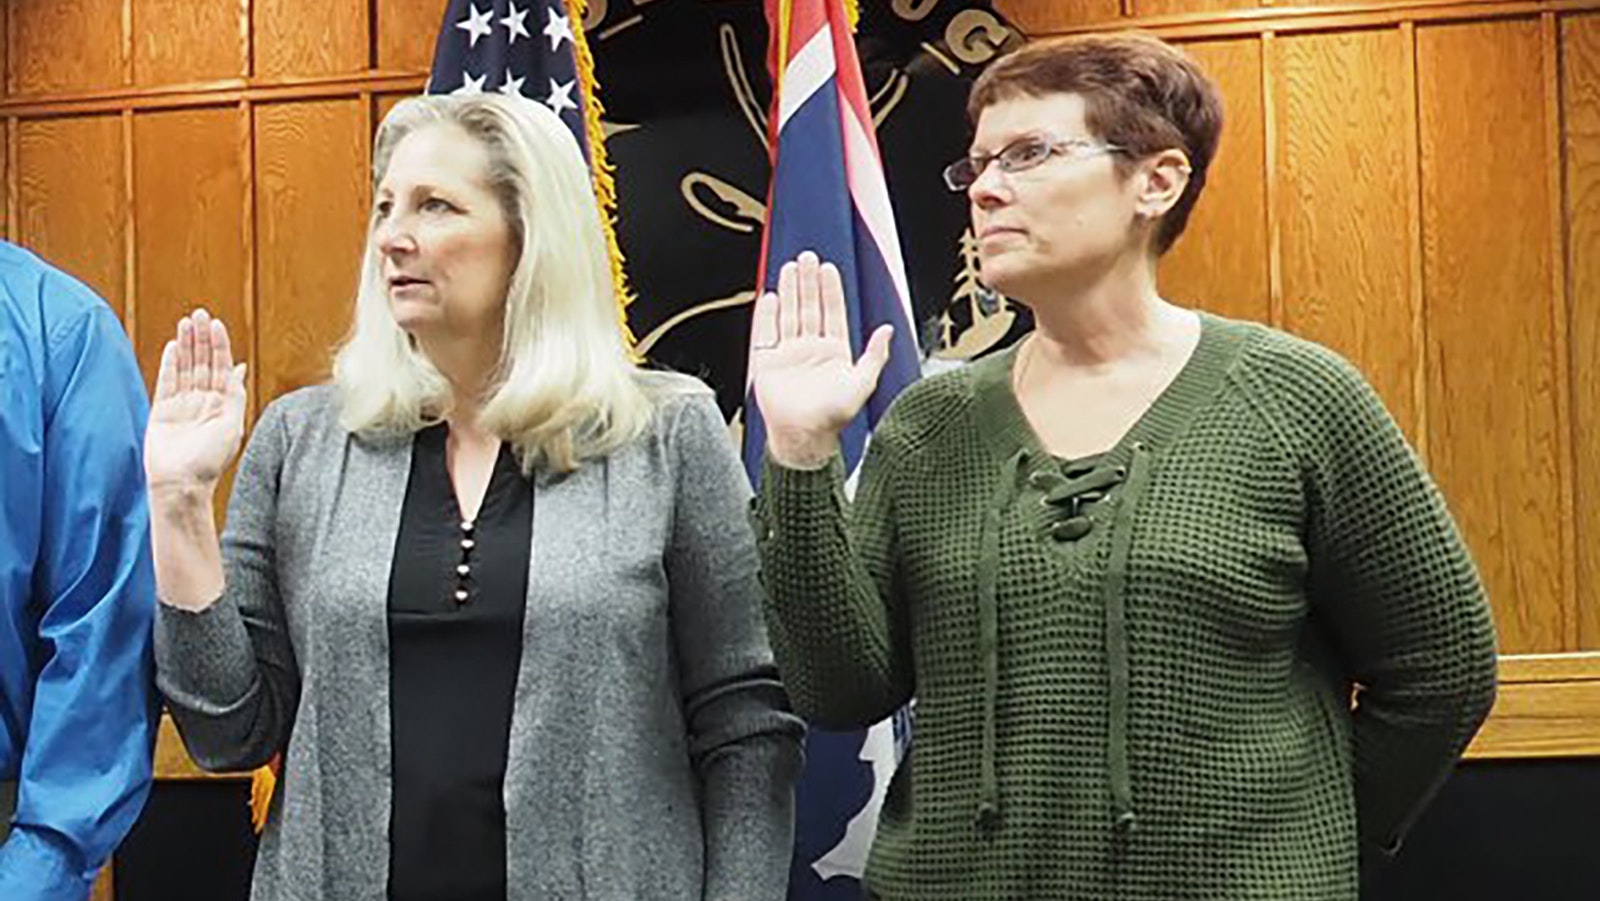 René Kemper, left, and Kim Pexton are sworn into office in 2019 respectively as Douglas mayor and city councilwoman. Paxton is now the mayor after Kemper died in March.